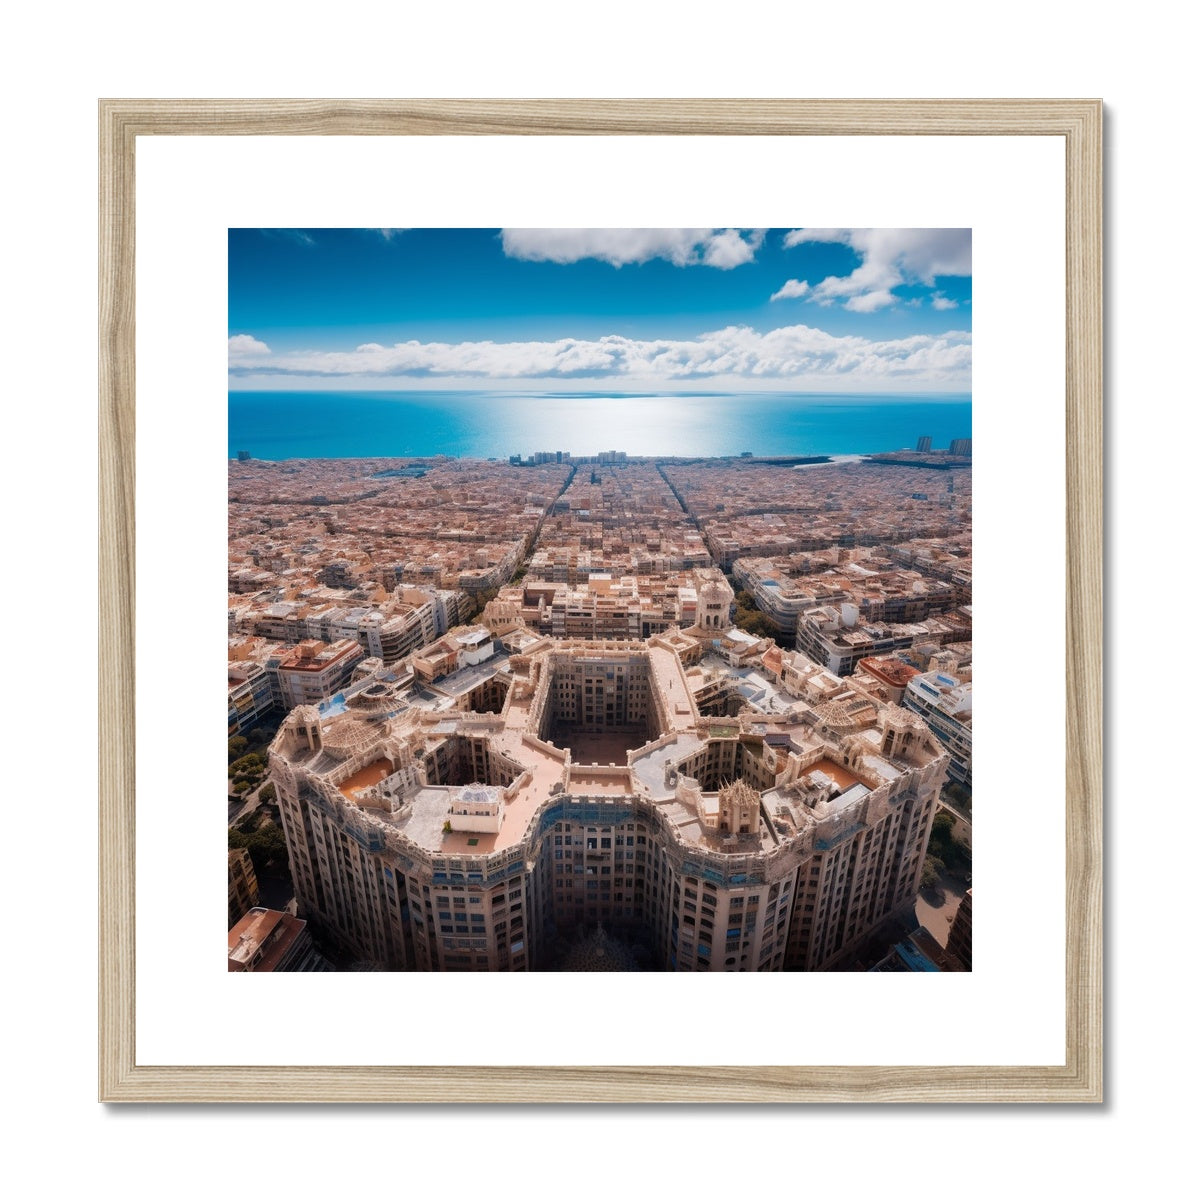 Barcelona Architecture From The Sky  Framed & Mounted Print